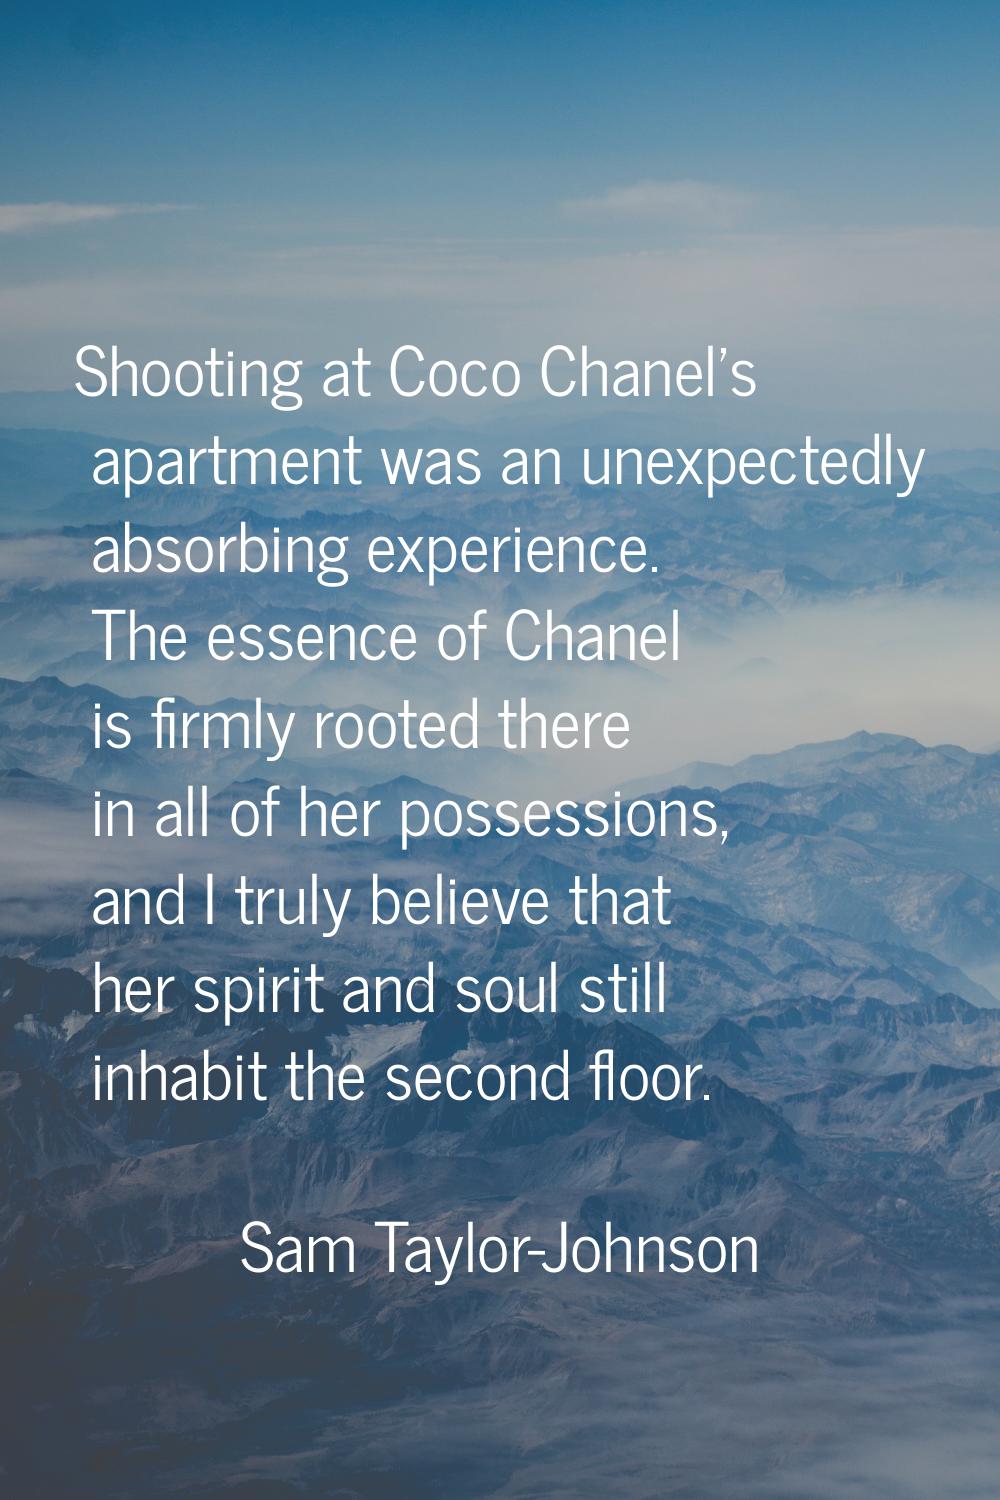 Shooting at Coco Chanel's apartment was an unexpectedly absorbing experience. The essence of Chanel